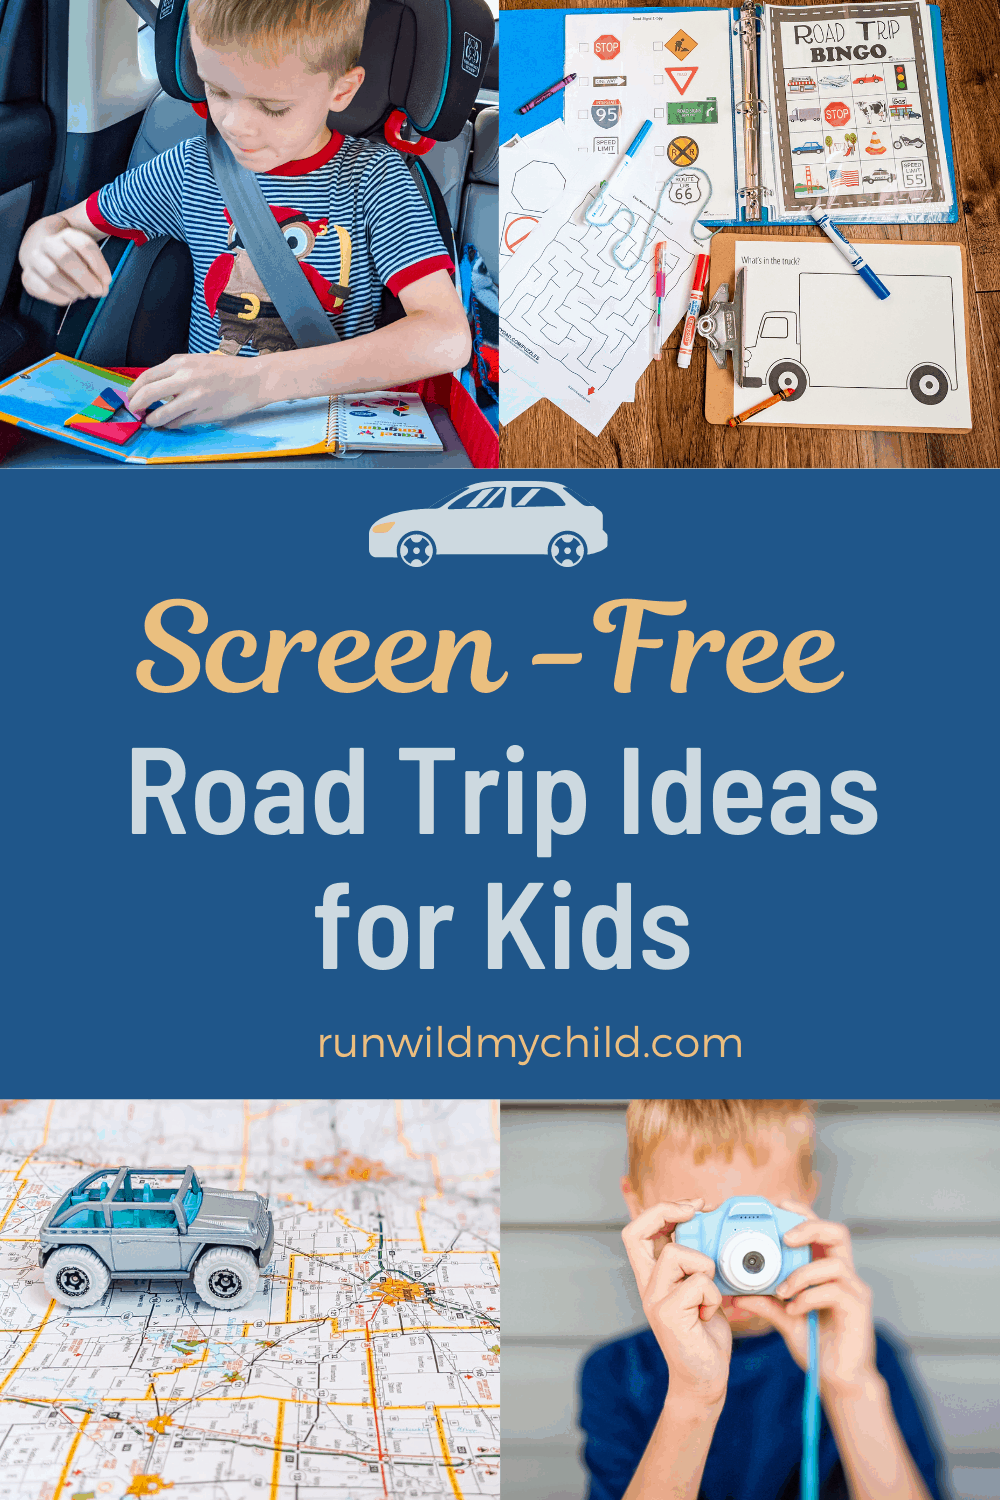 screen-free road trip ideas for kids - traveling with kids